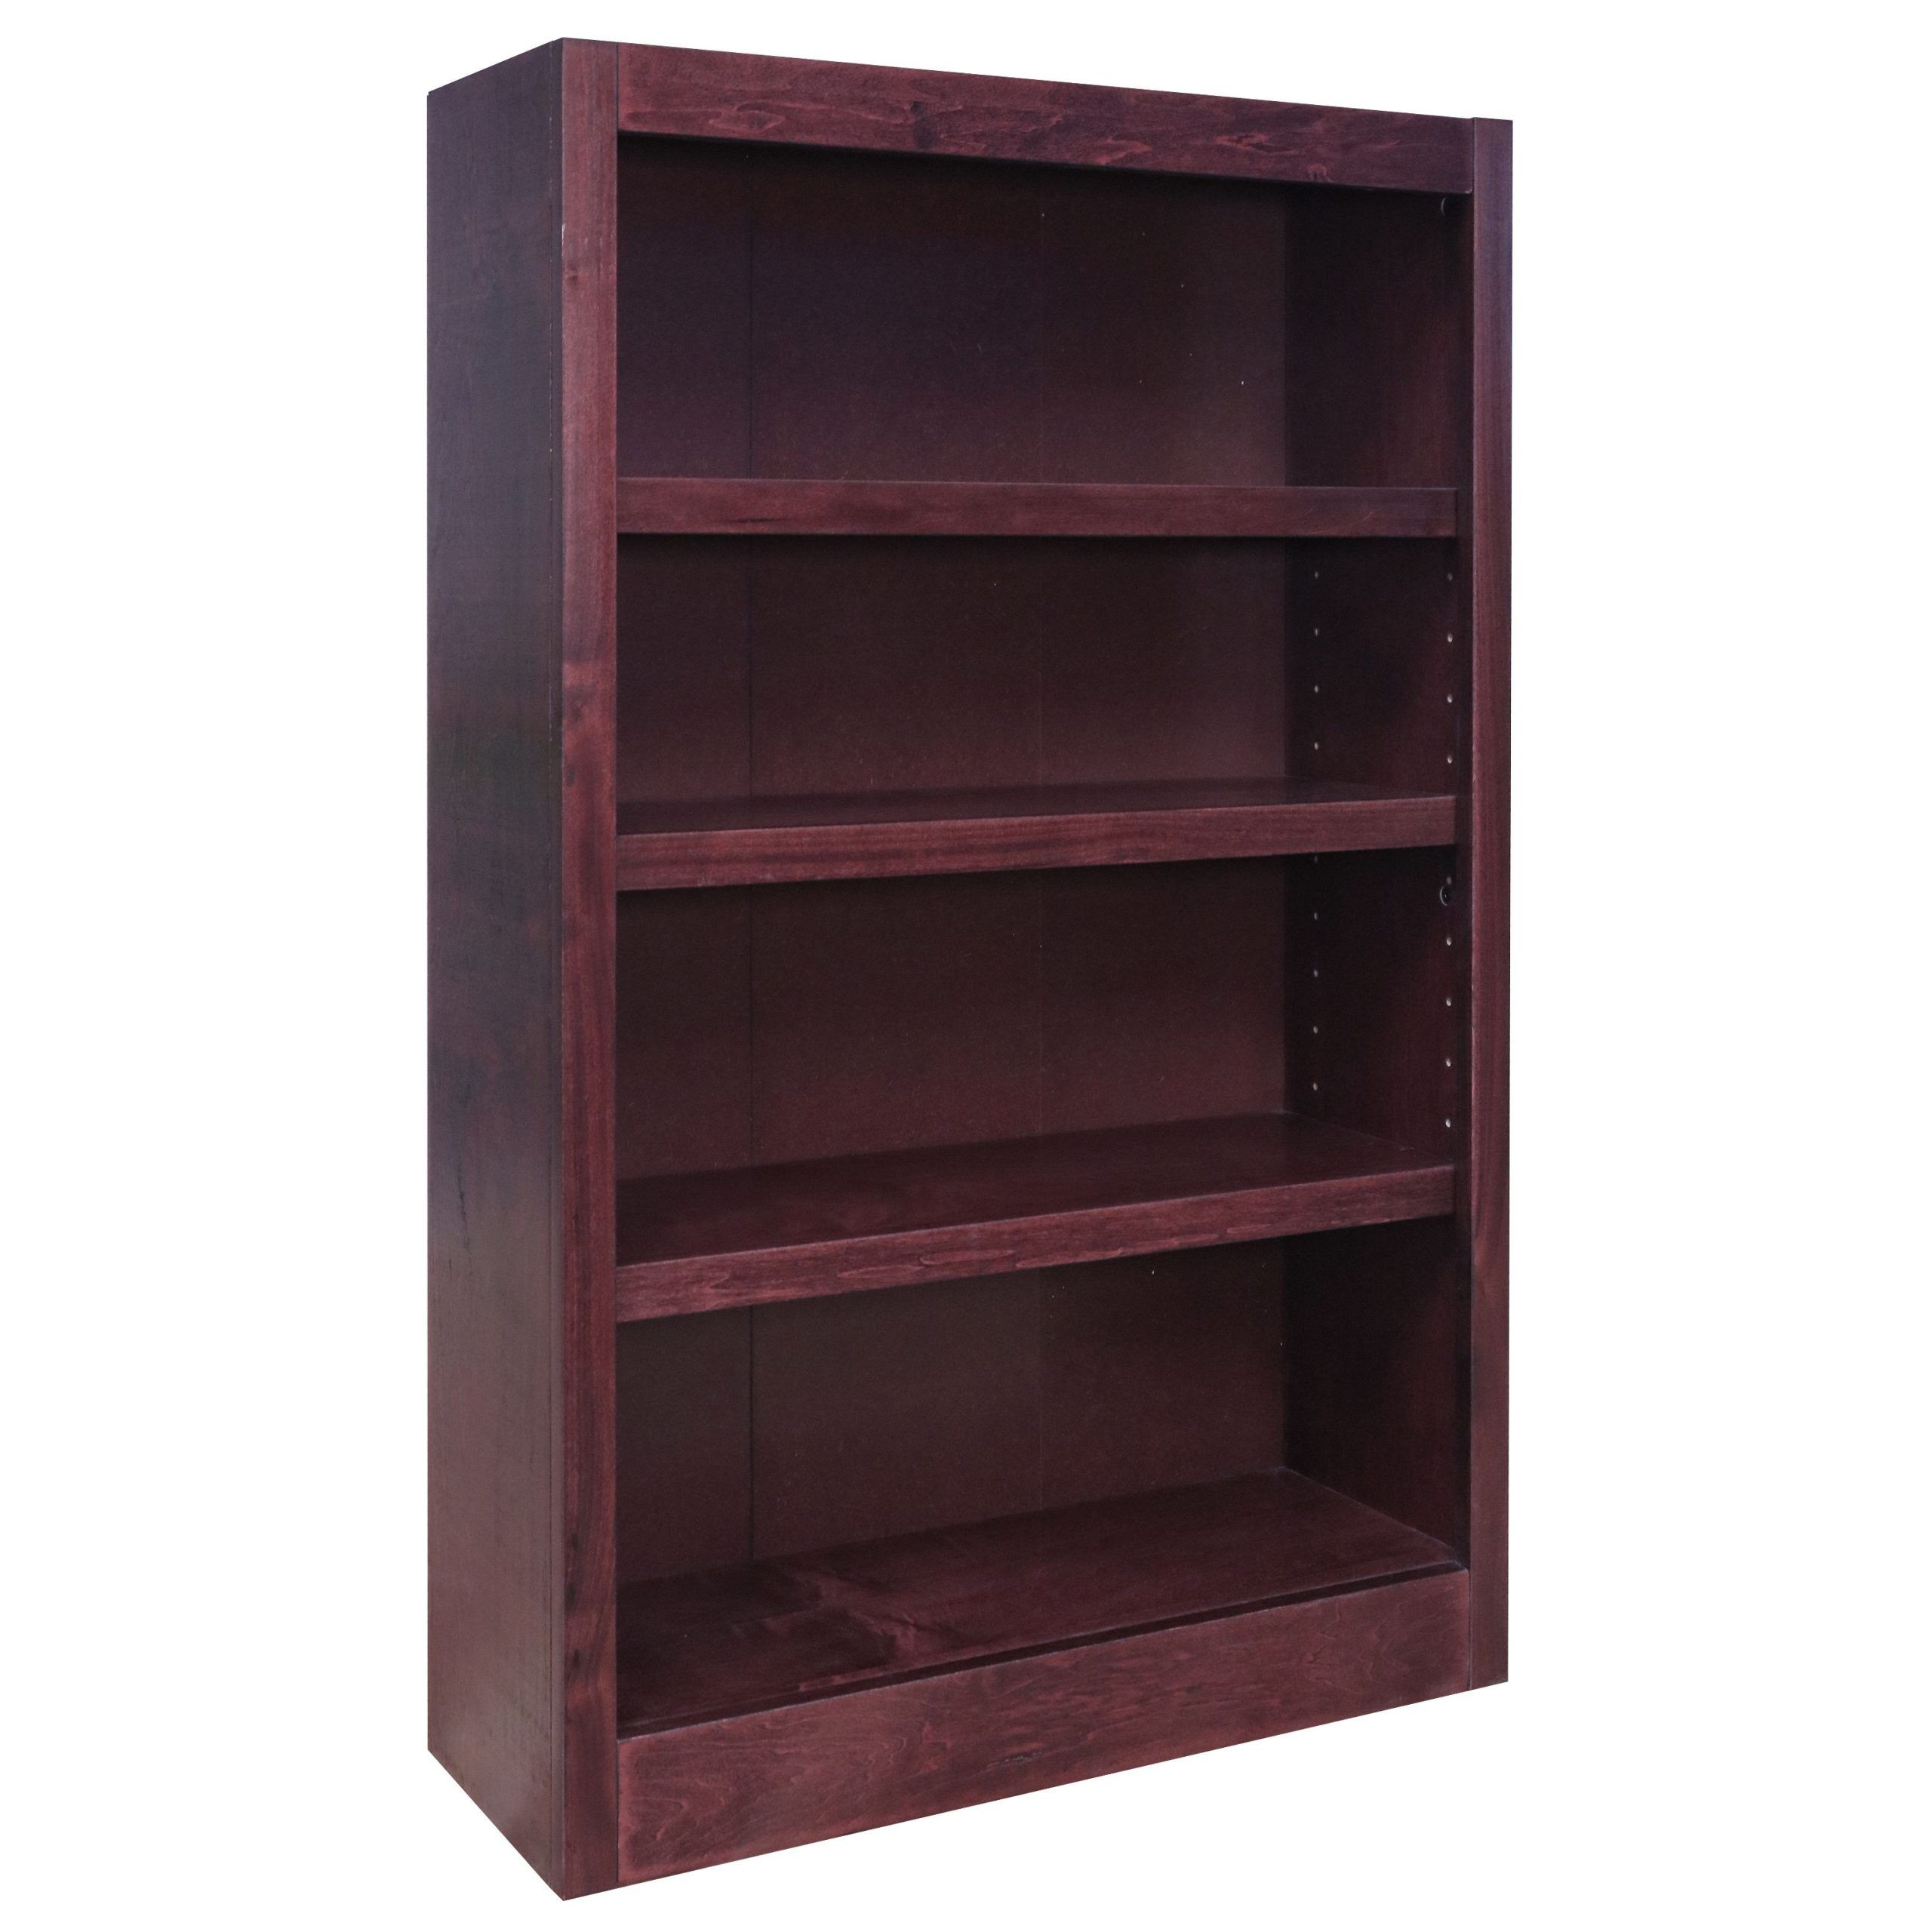 Concepts In Wood 4 Shelf Wood Bookcase, 48 Inch Tall – Oak Finish –  Walmart With Regard To 48 Inch Bookcases (View 10 of 15)